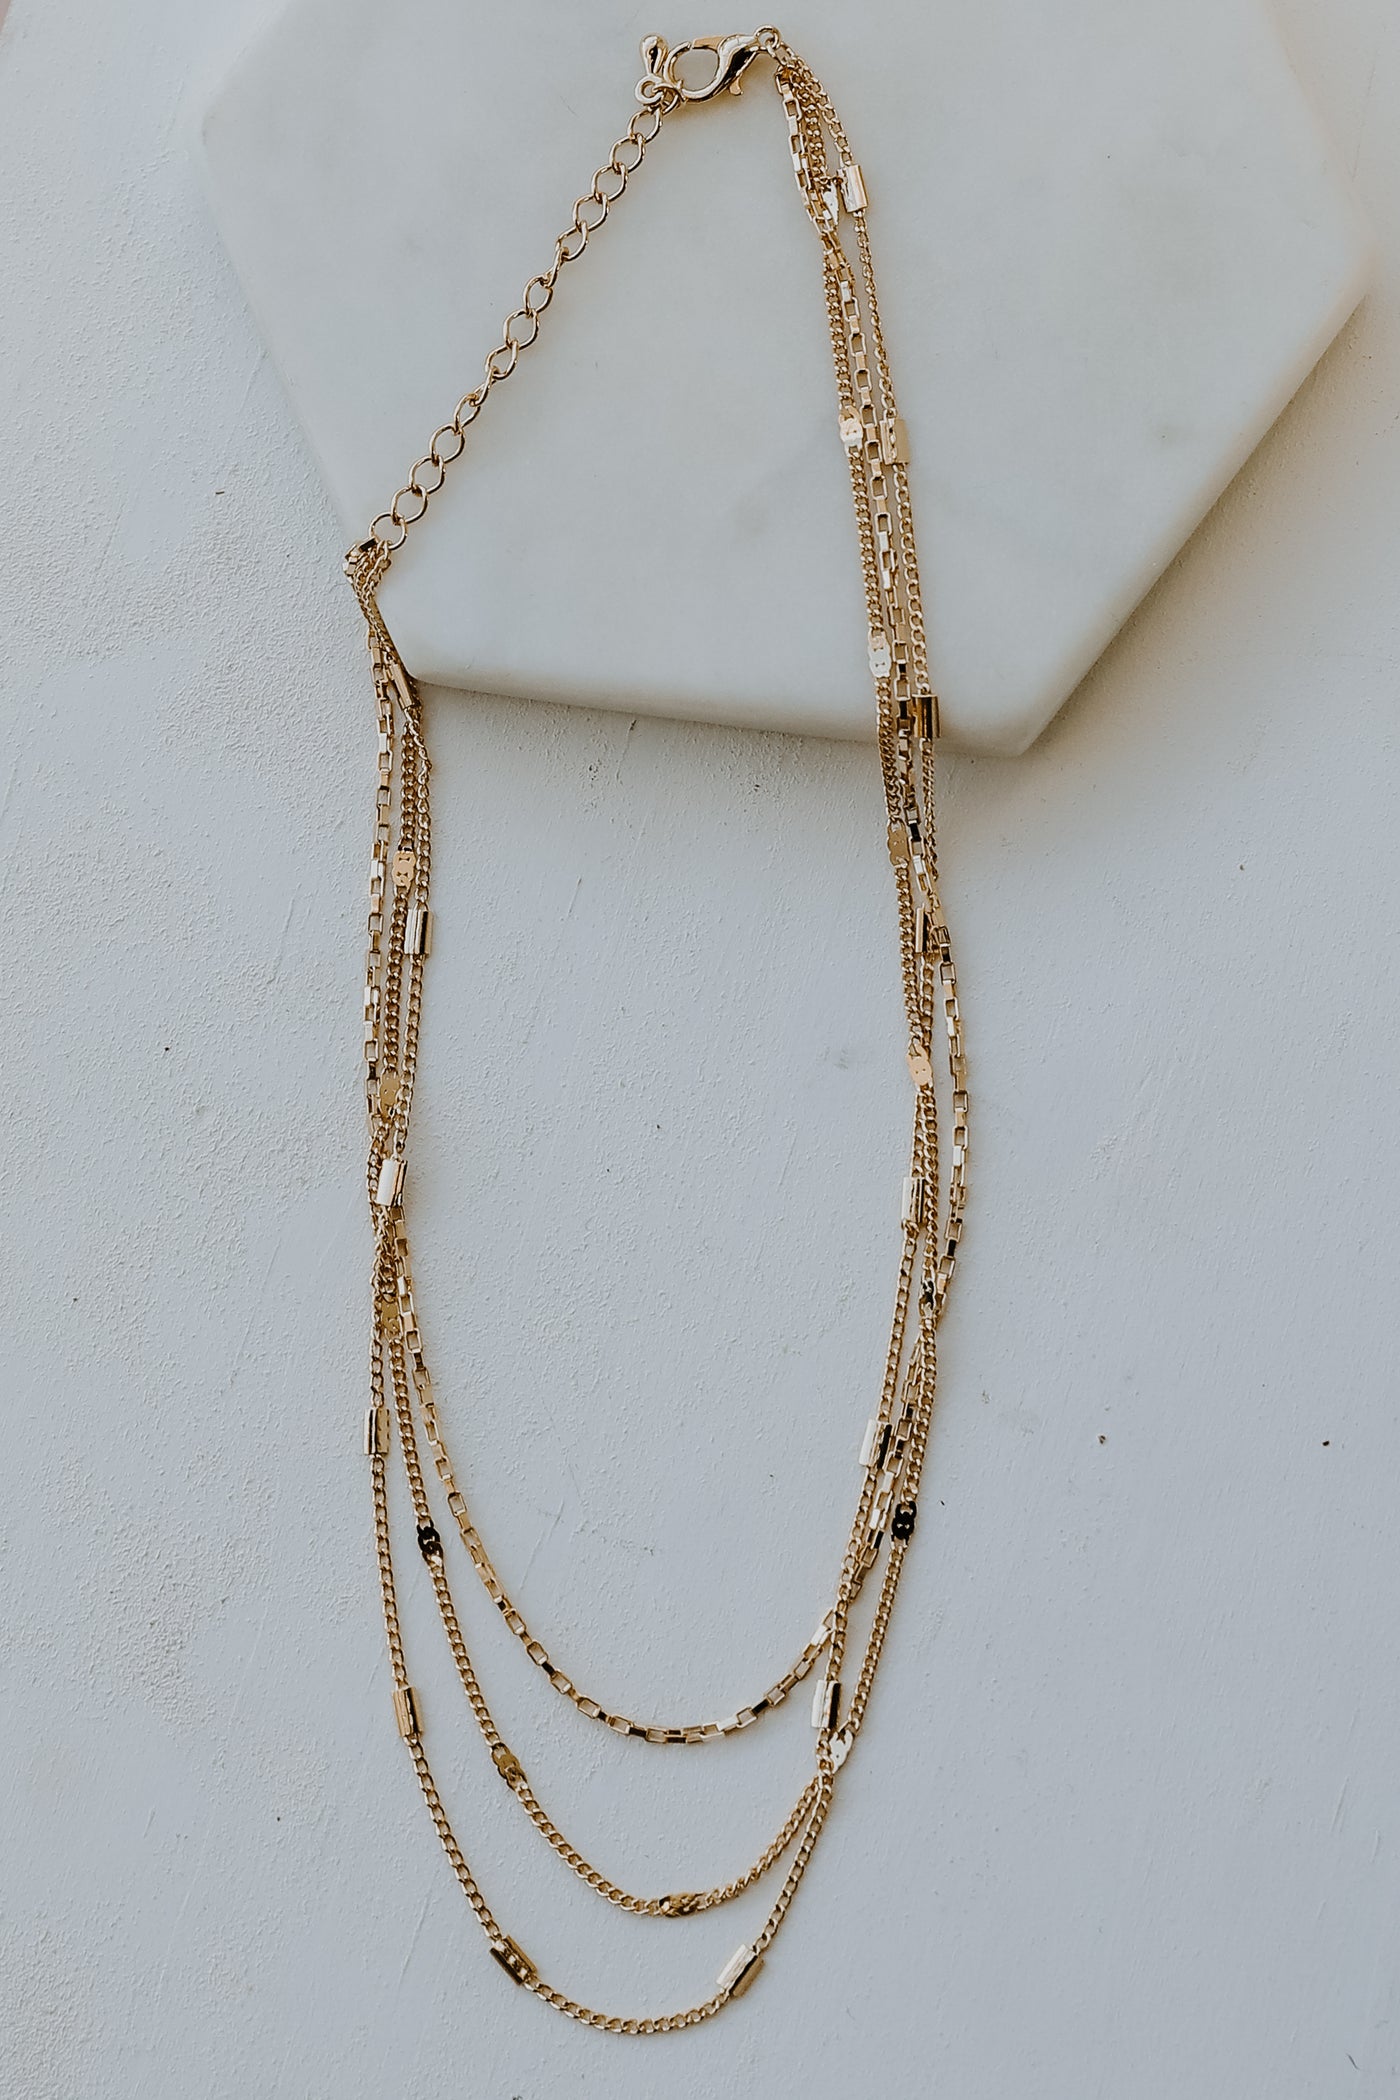 Gold Layered Necklace flat lay